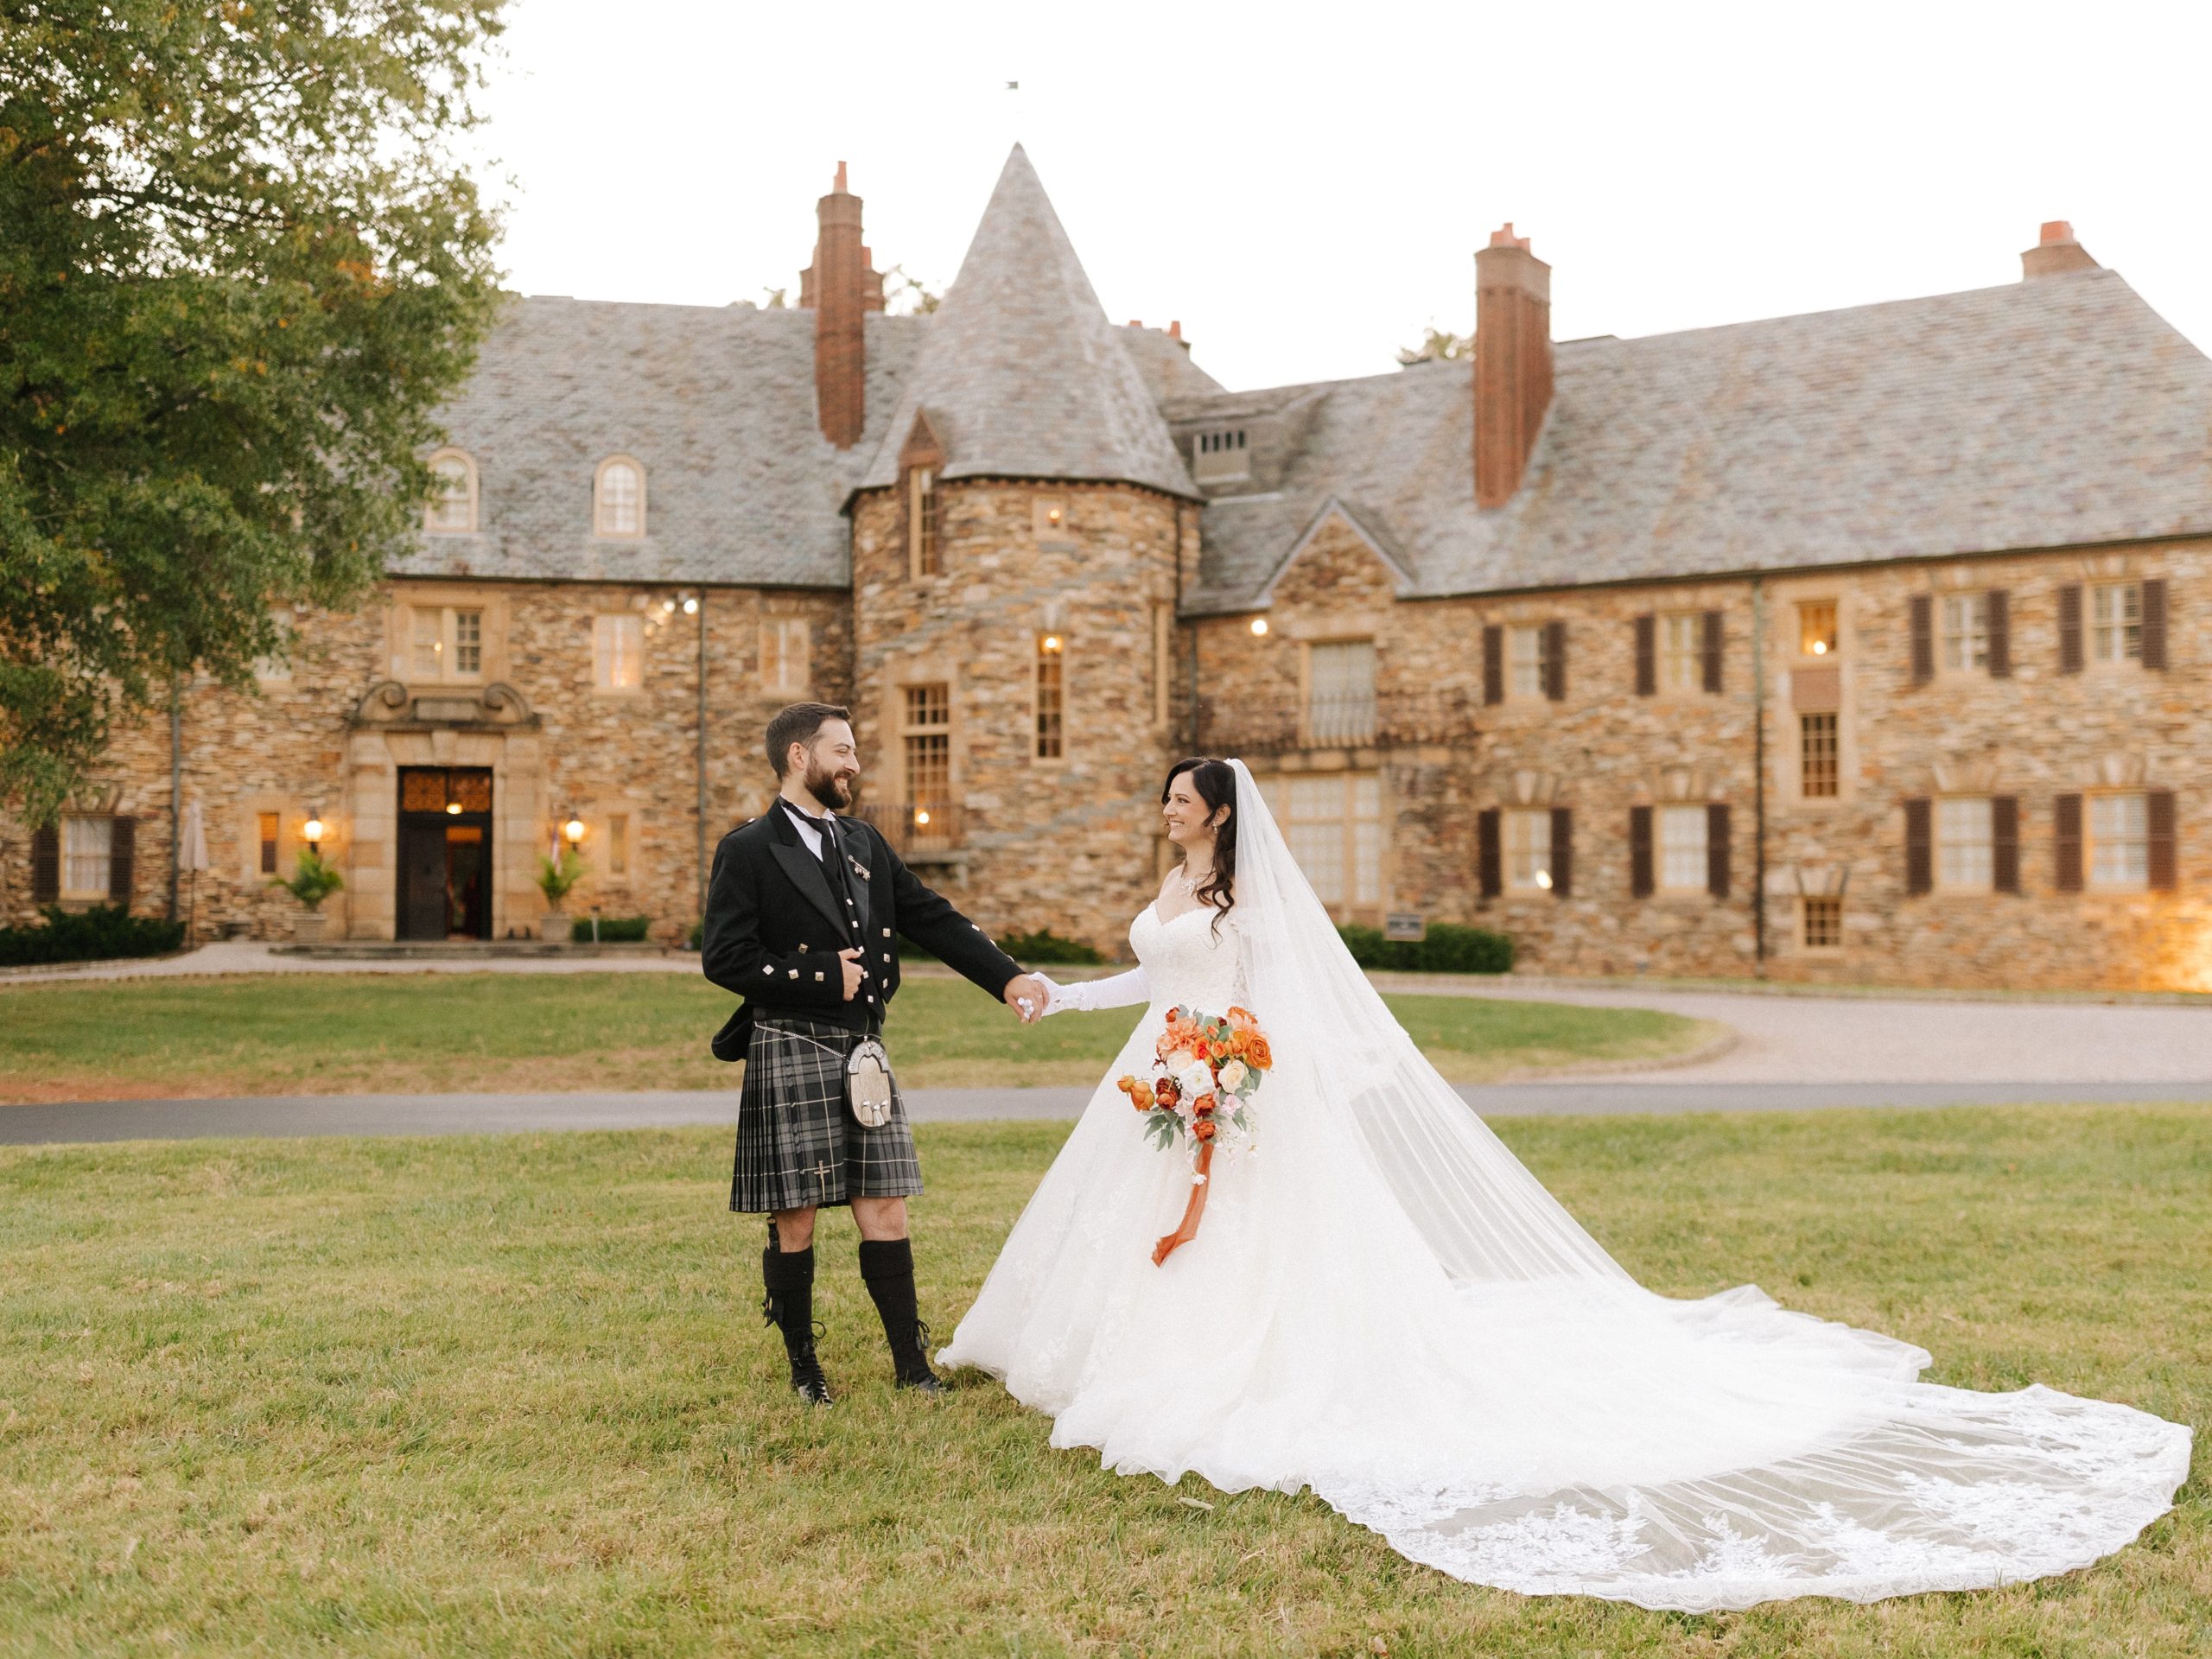 A couple stands in their scottish attire in front of The Graylyn Estate on their wedding day in Winston-Salem.